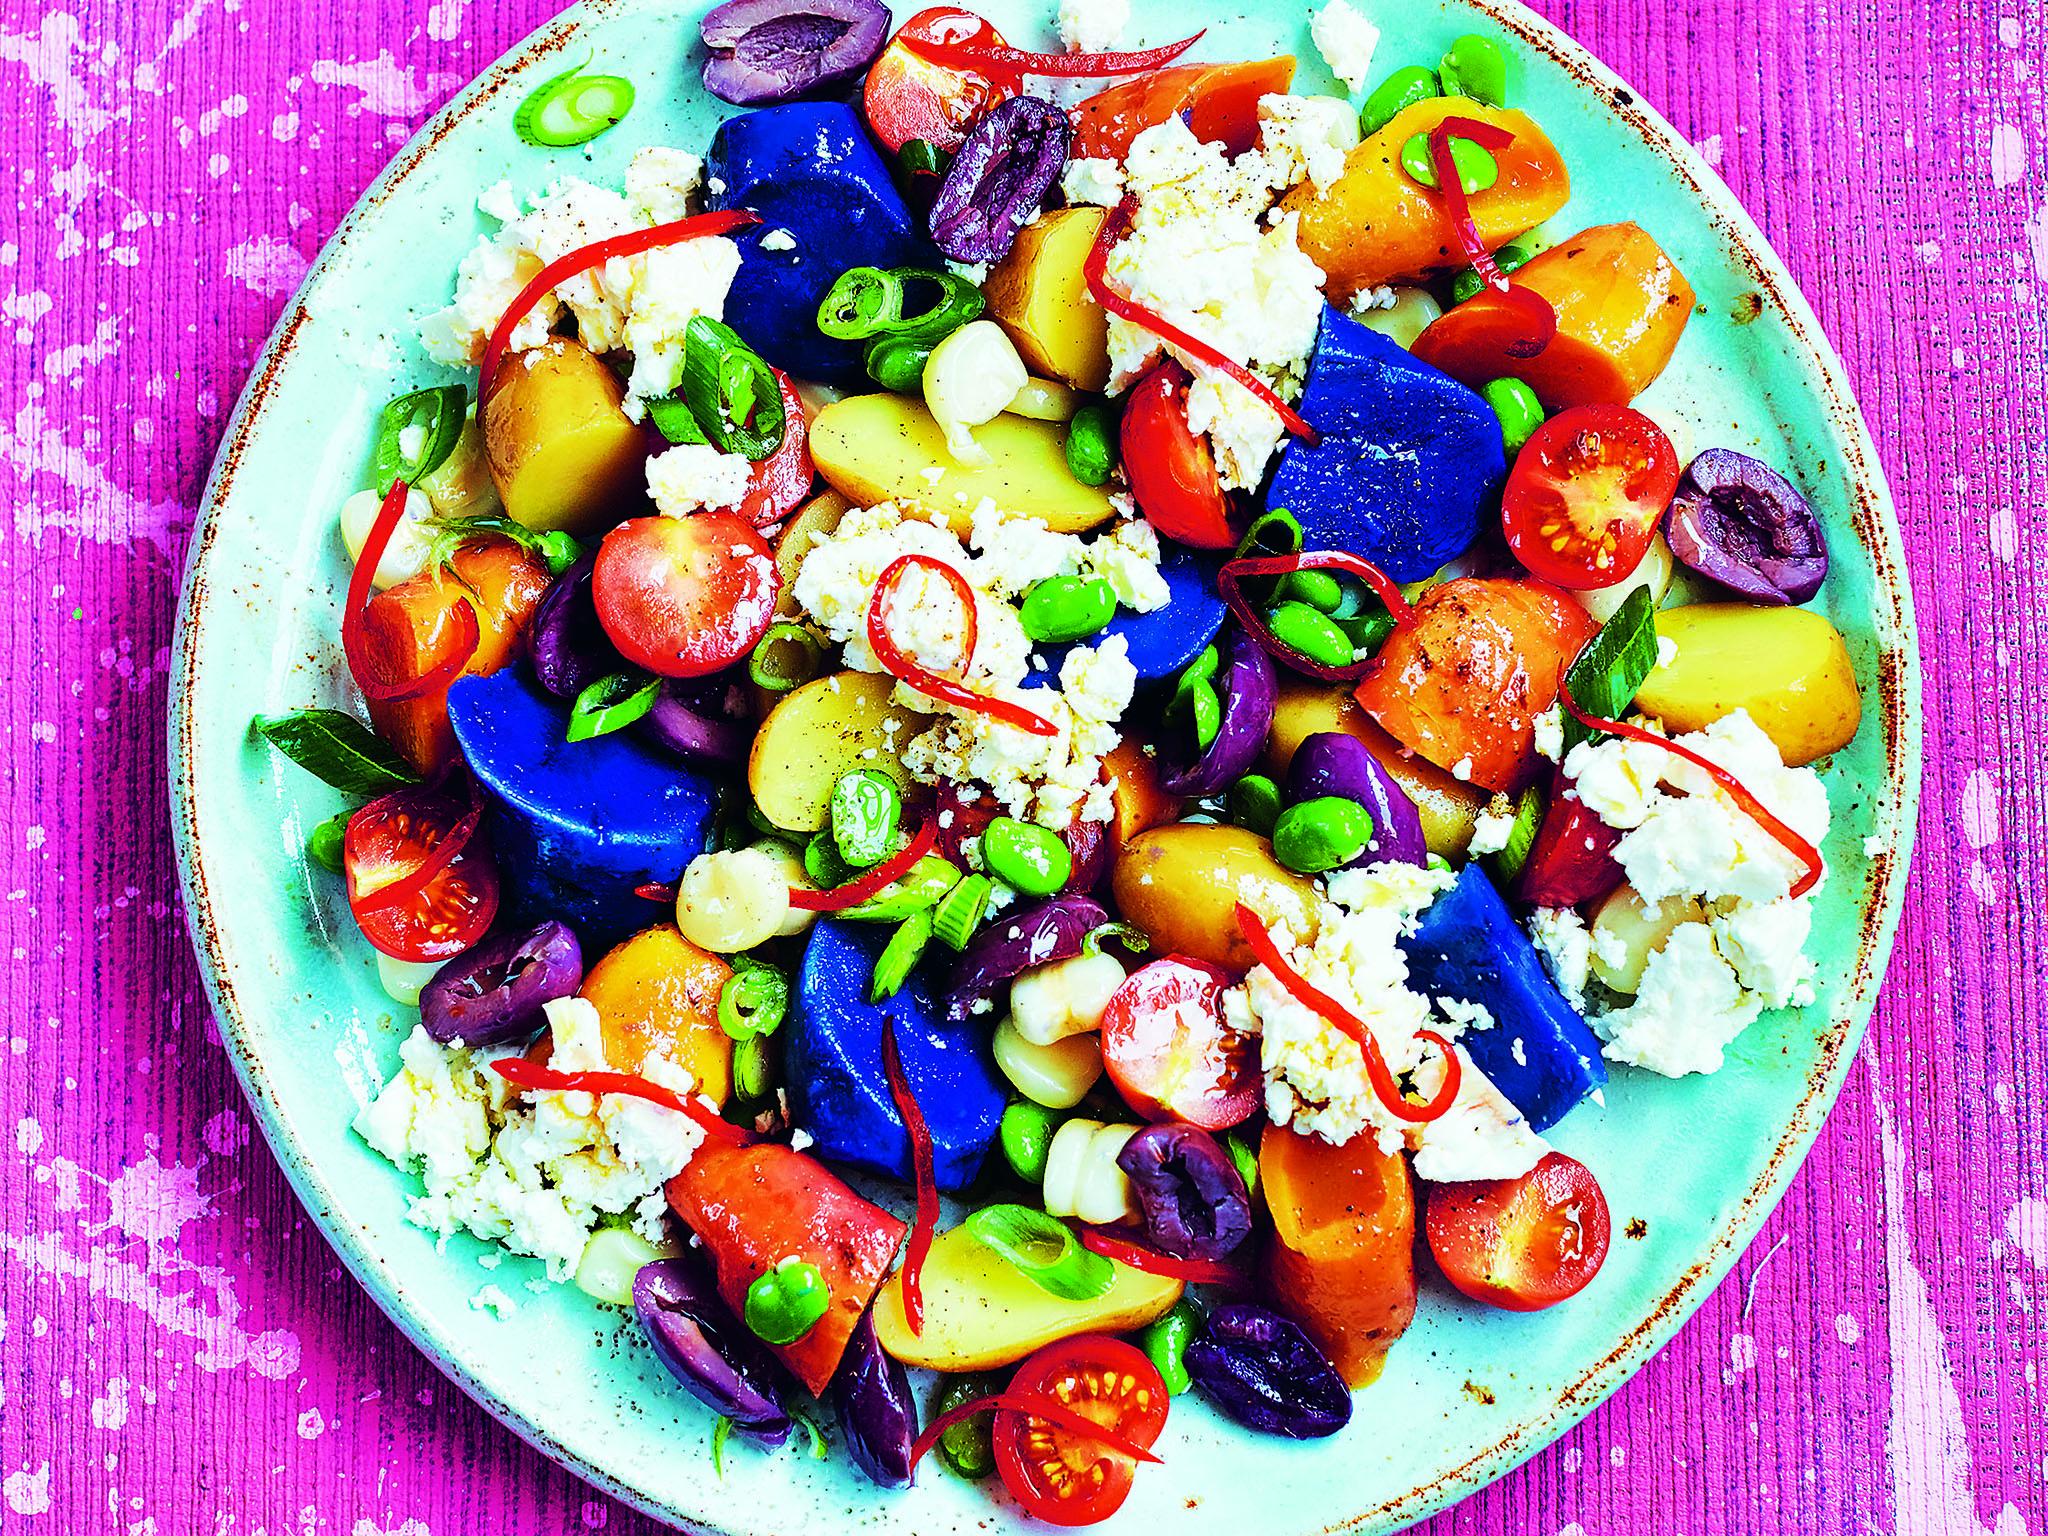 All things bright and beautiful: with purple potatoes, cherry tomatoes and Kalamata olives this dish bursts with colour